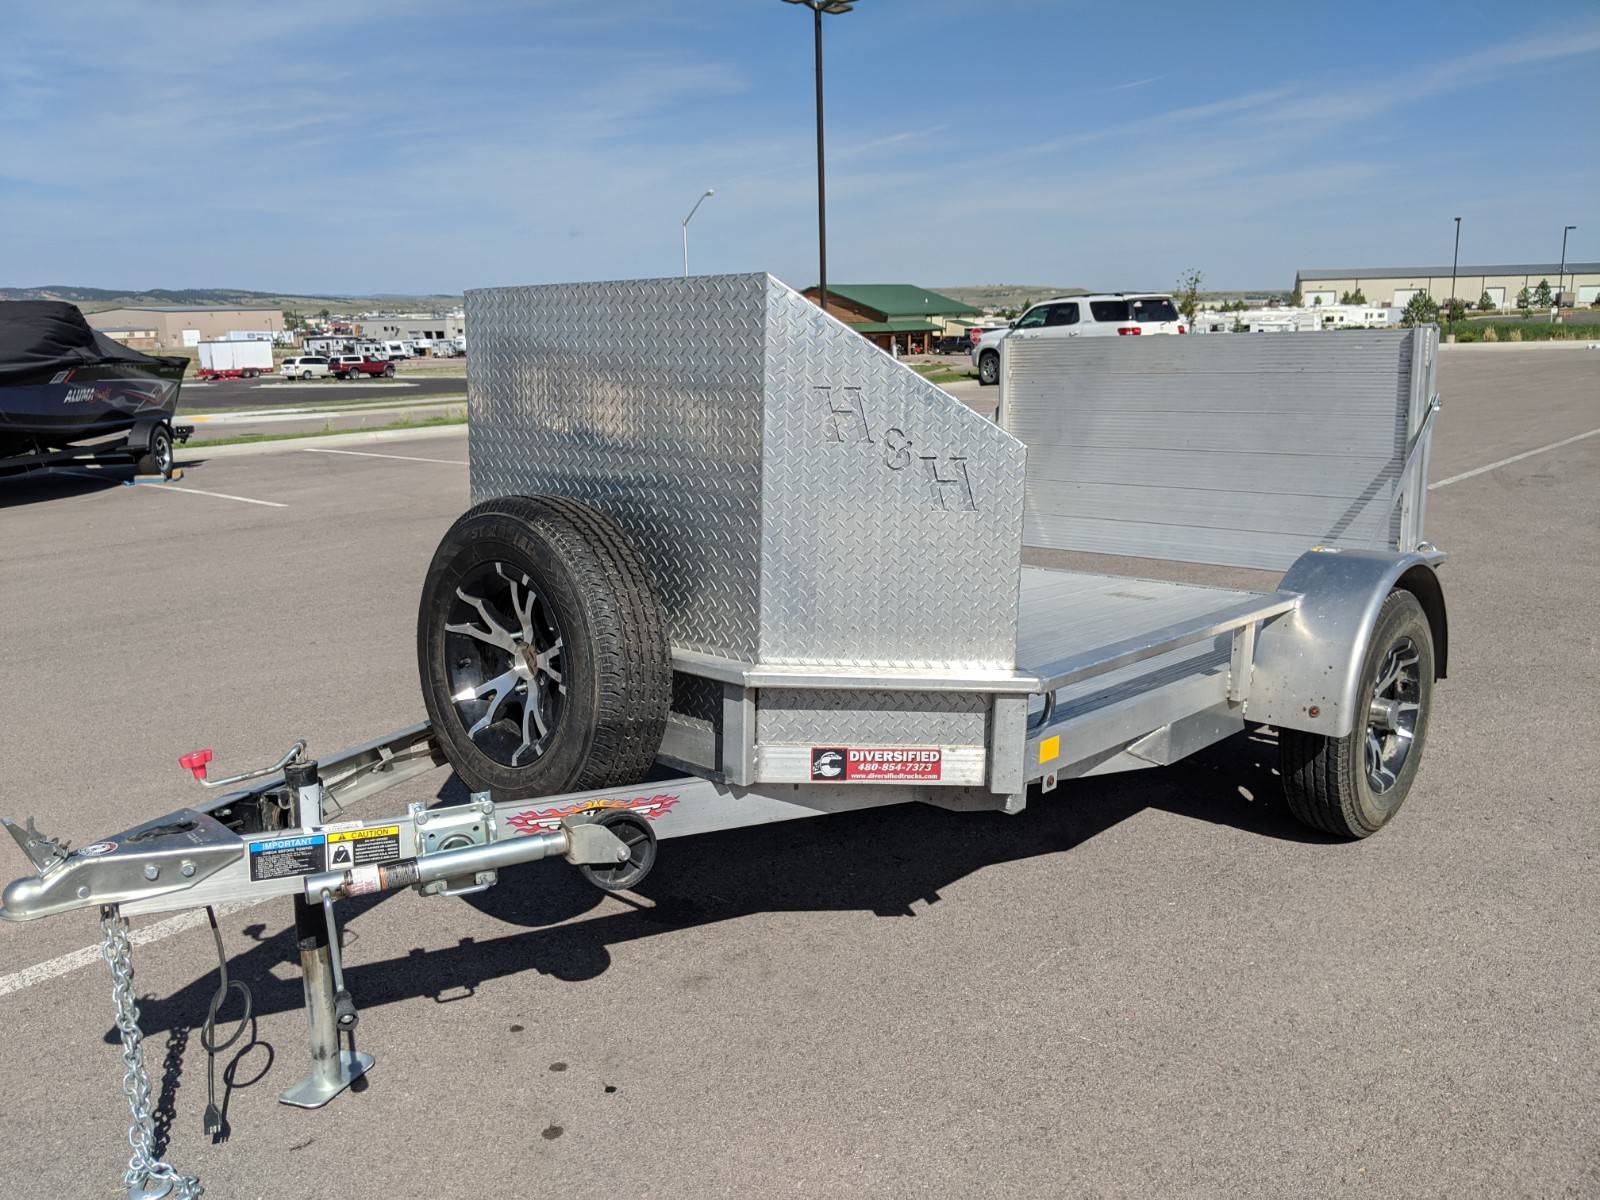 Used 2016 H H Fd306 2 Place Cycle Trailer Silver Utility Trailers In Rapid City Sd U003